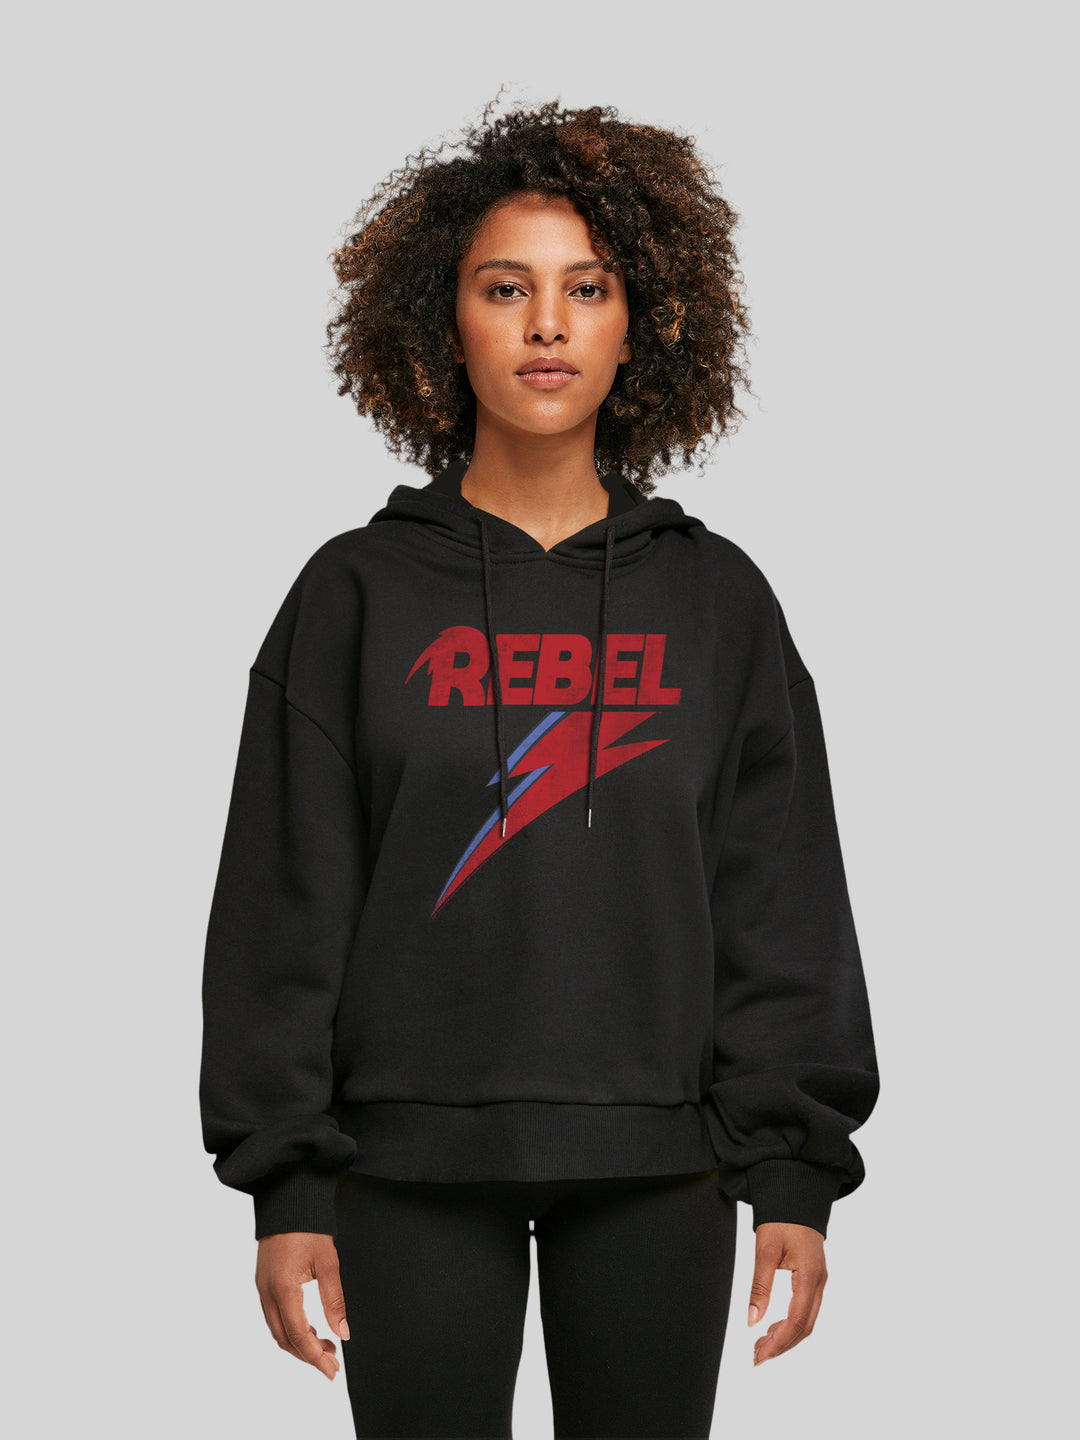 David Bowie Distressed Rebel with Ladies Organic Oversized Hoody